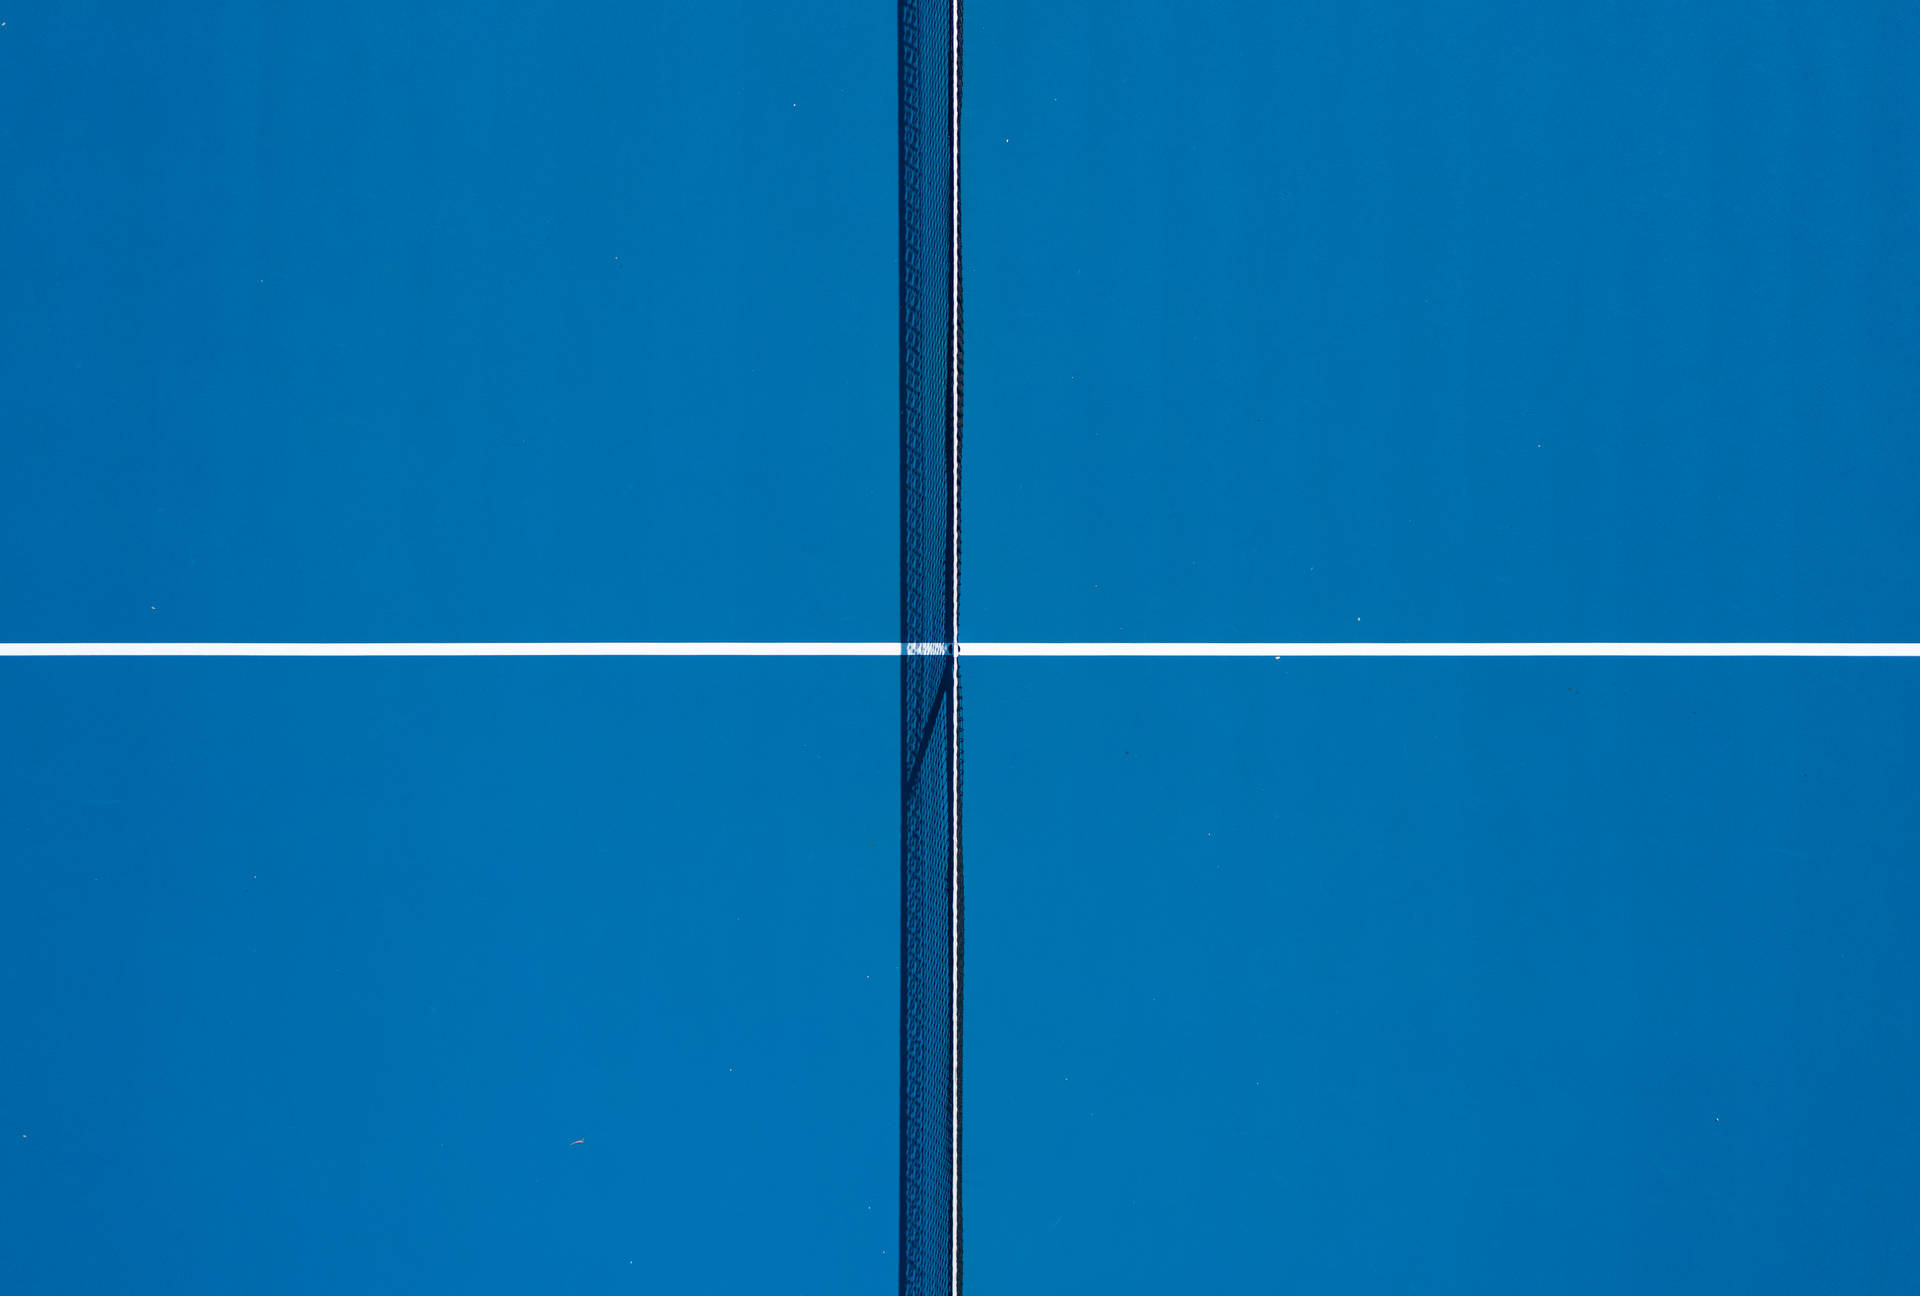 5203X3513 Tennis Wallpaper and Background